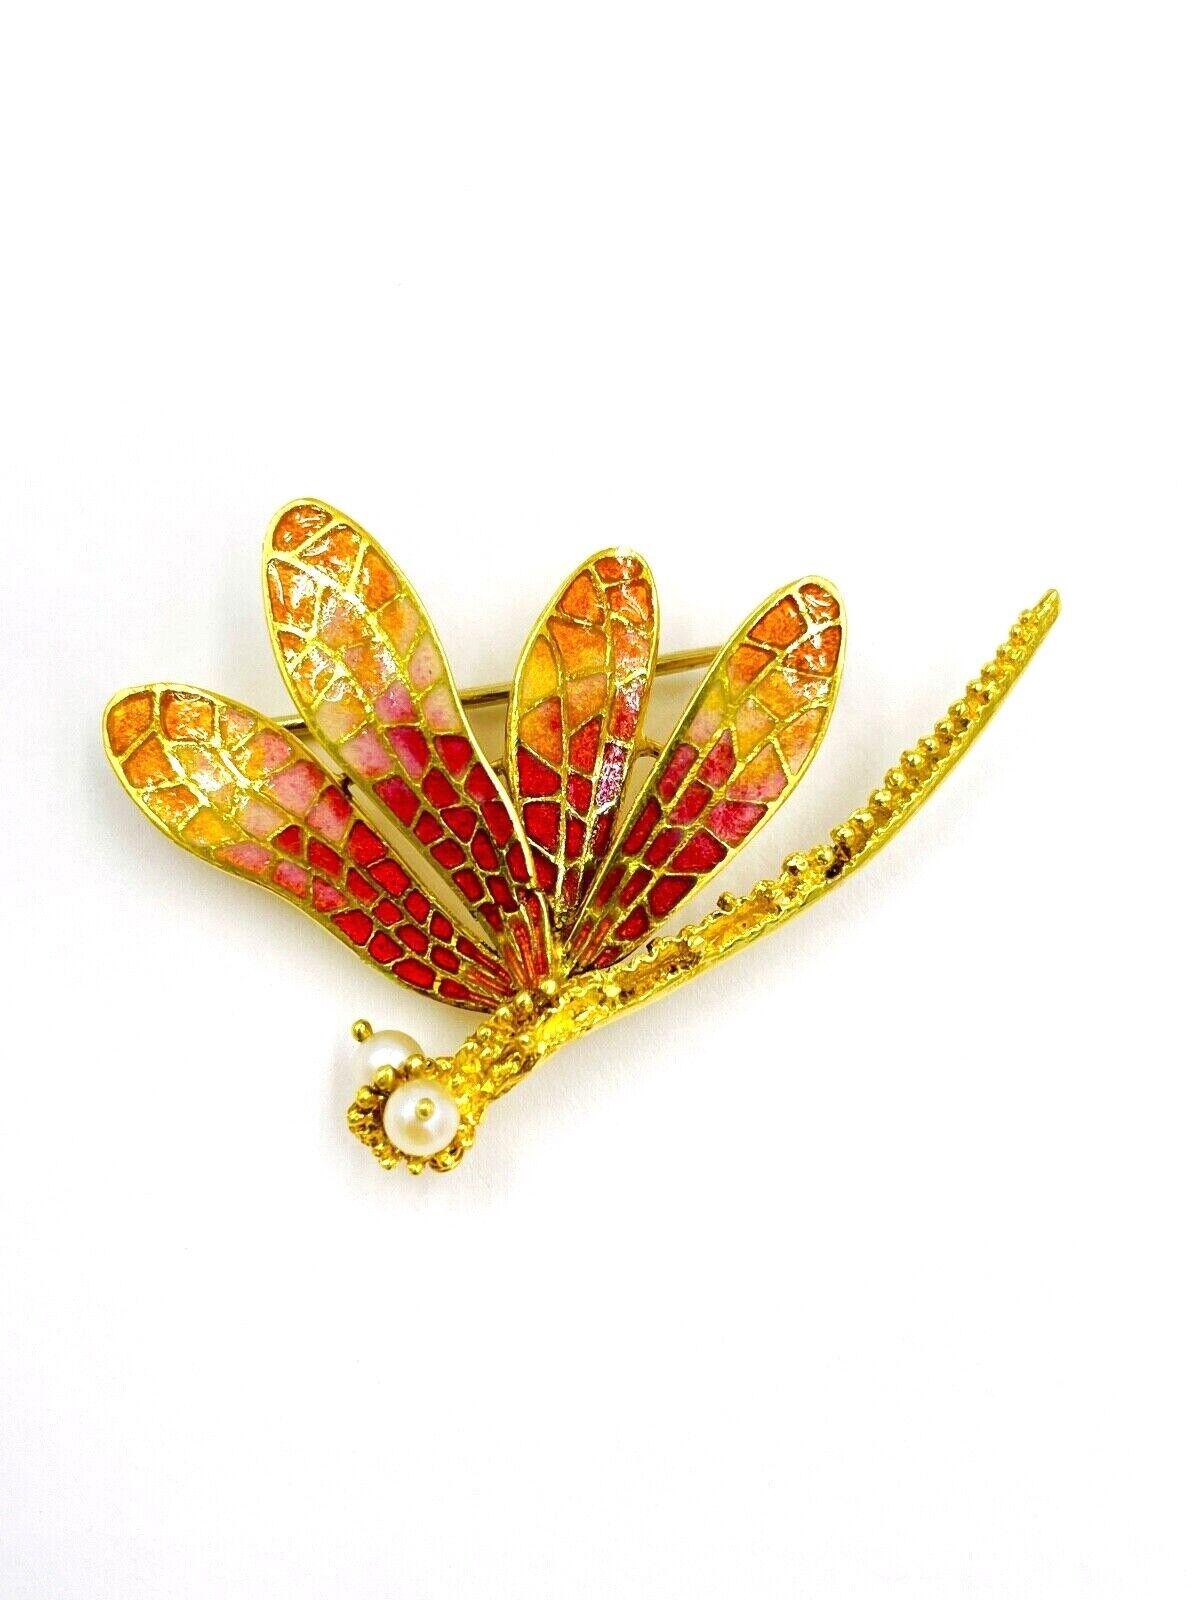 Enamel cultured pearls and yellow gold dragonfly brooch circa 1960. *

ABOUT THIS ITEM:  #P-DJ624G. Scroll down for specifications.  The wings are decorated by enamel ranging in shades of coral, pink, and orange colors, and the eyes are formed by a